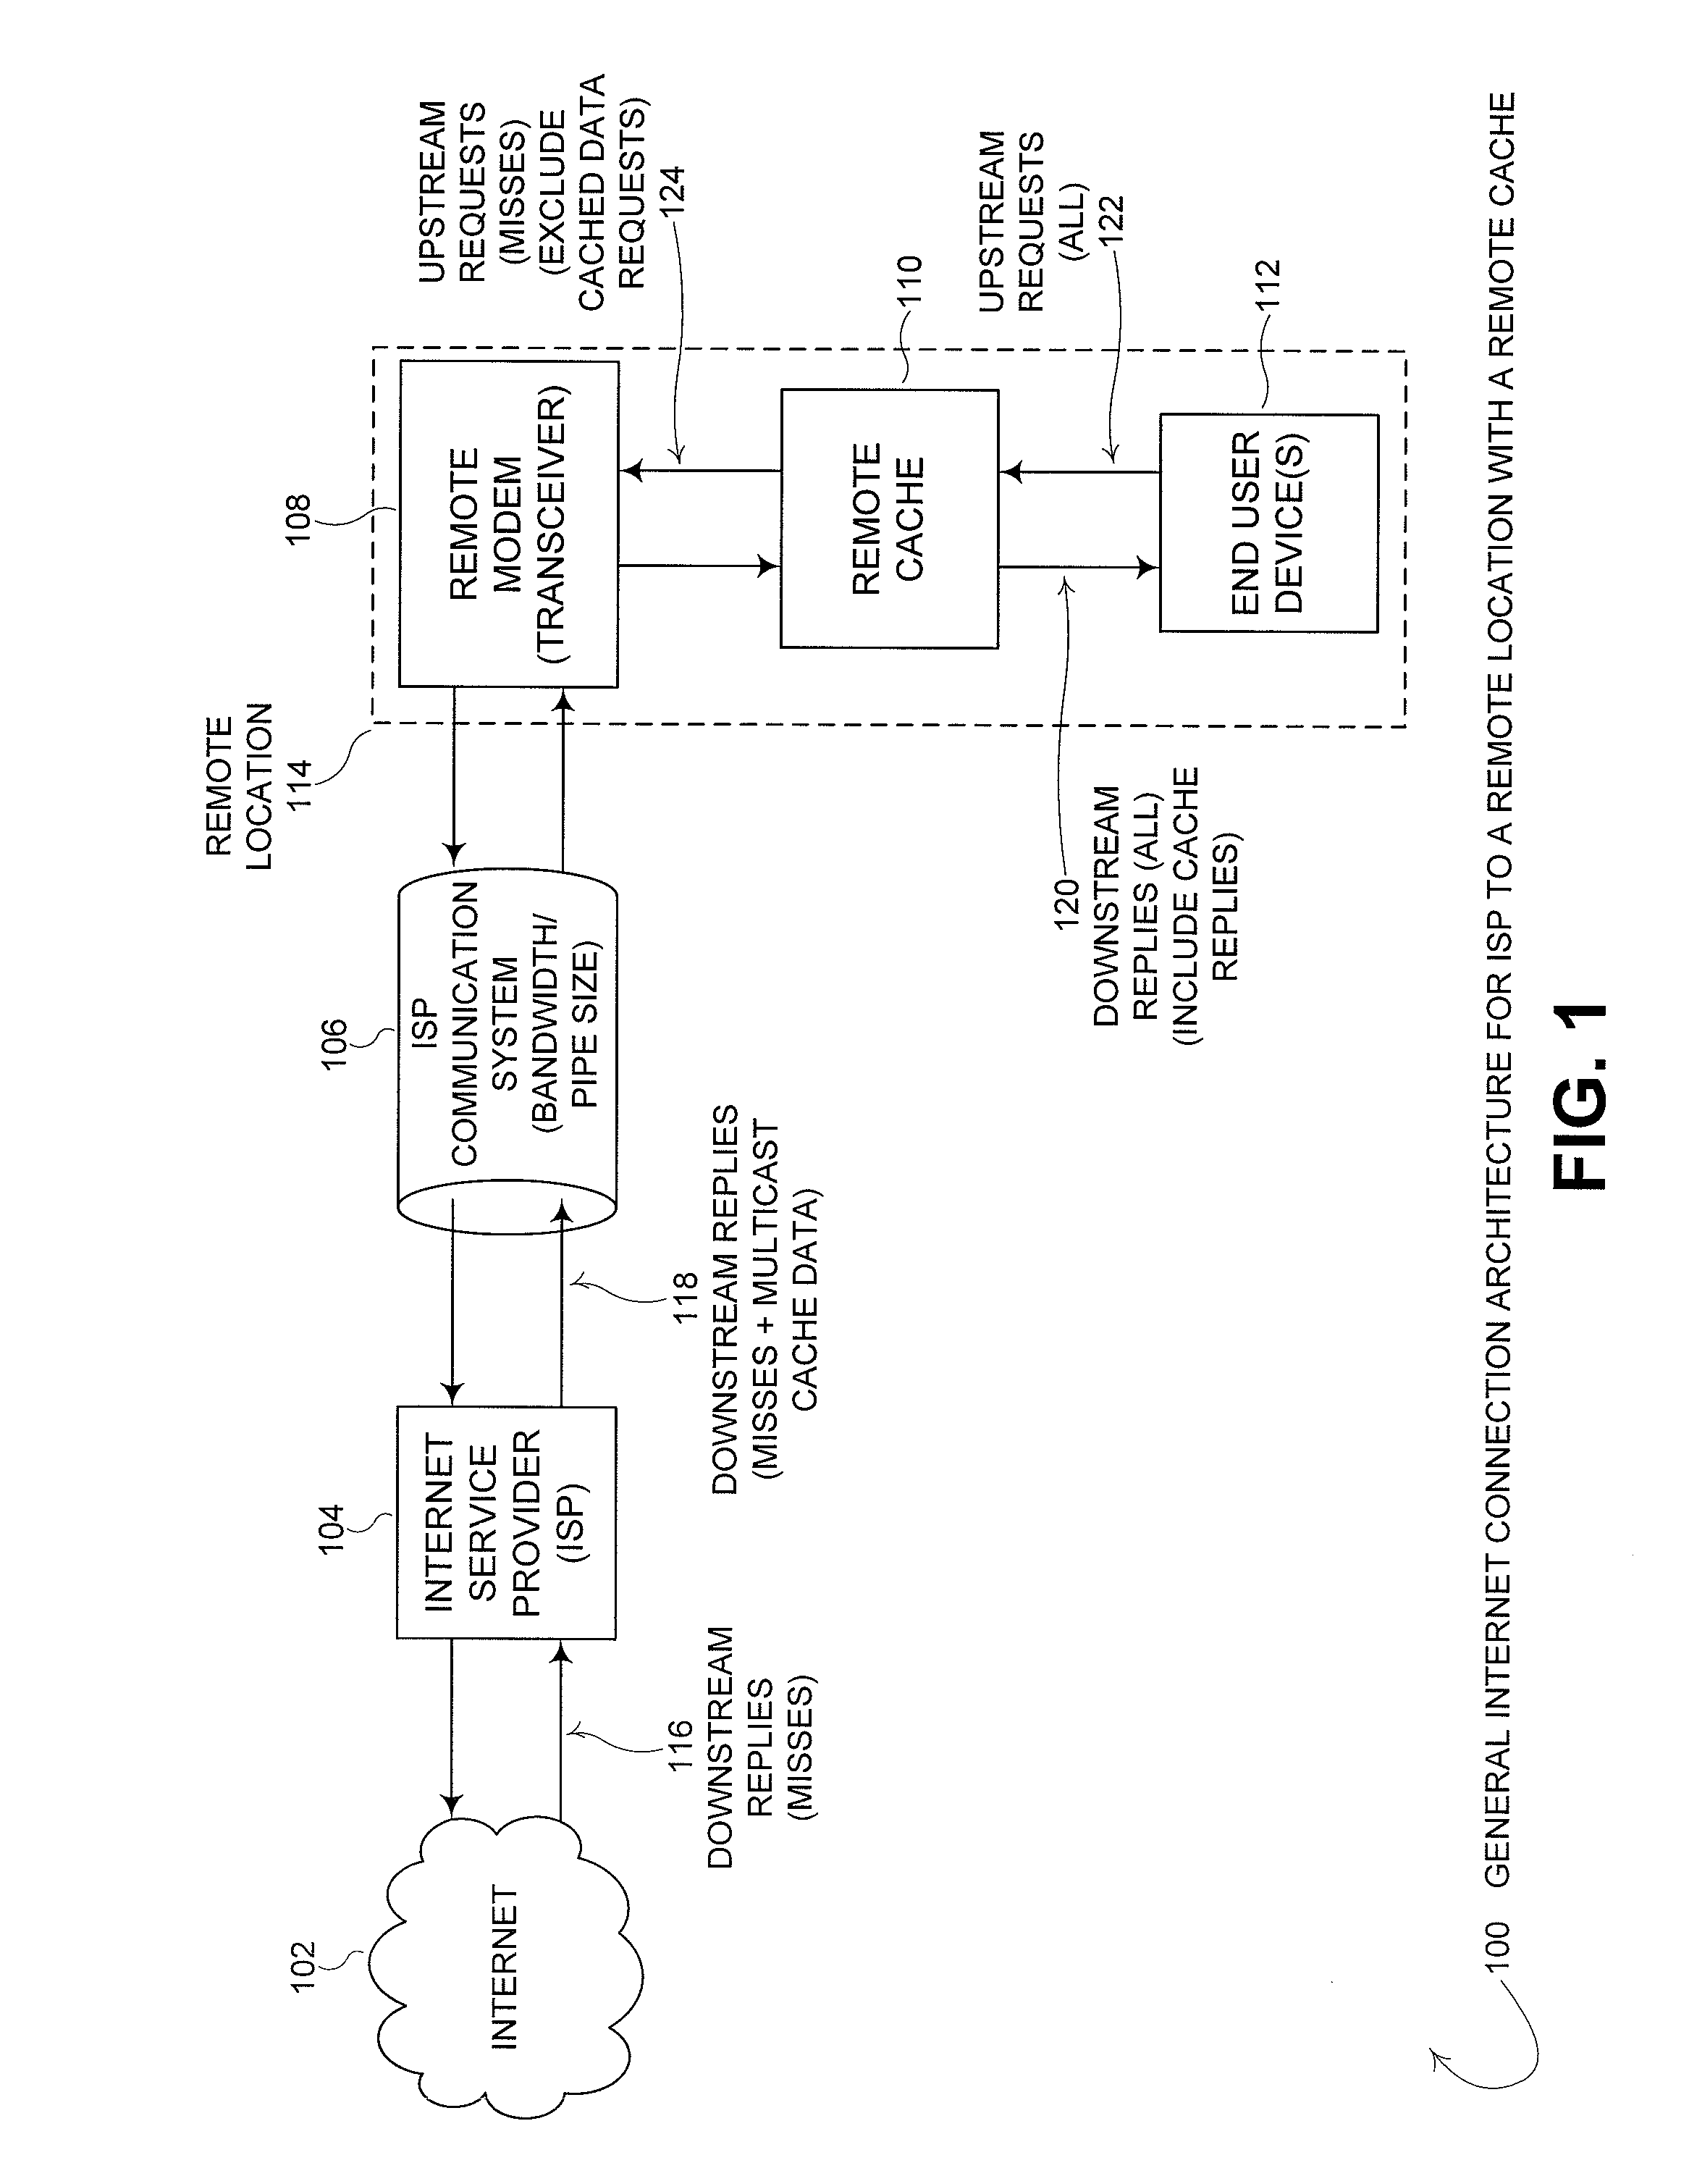 Distributed cache - adaptive multicast architecture for bandwidth reduction